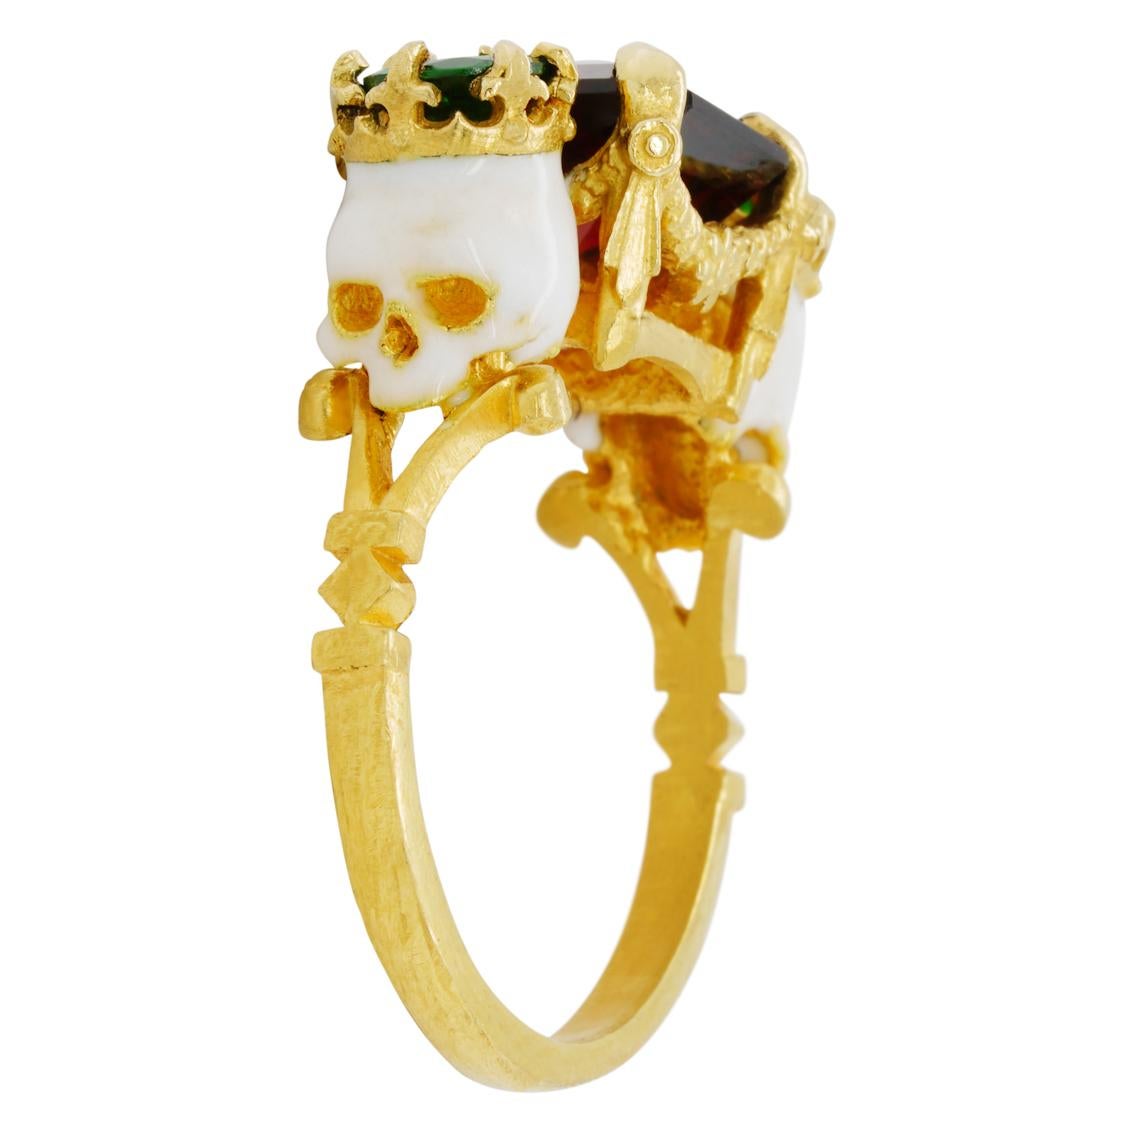 Baroque Catacomb Saints Garland Ring in 22 Karat Gold with Red and Tsavorite Garnets